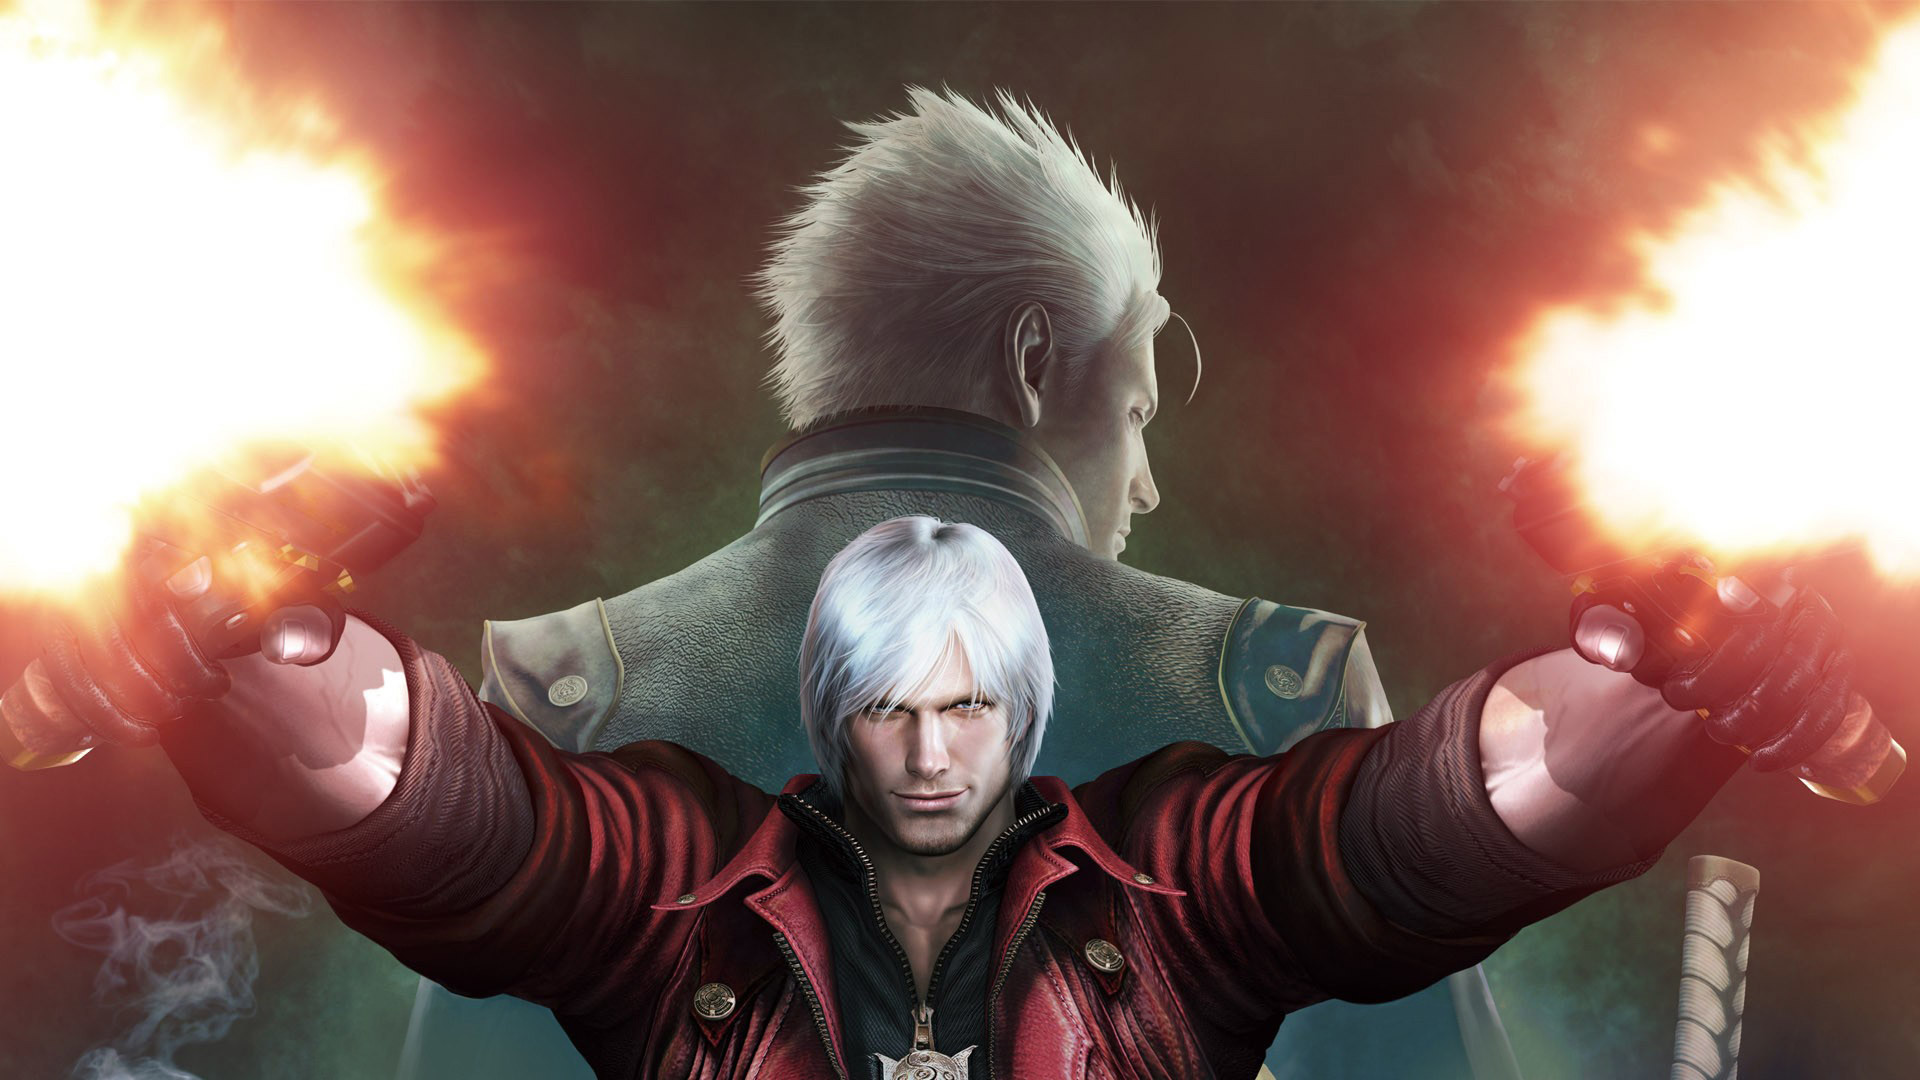 Devil May Cry 4 Wallpaper 73 Pictures